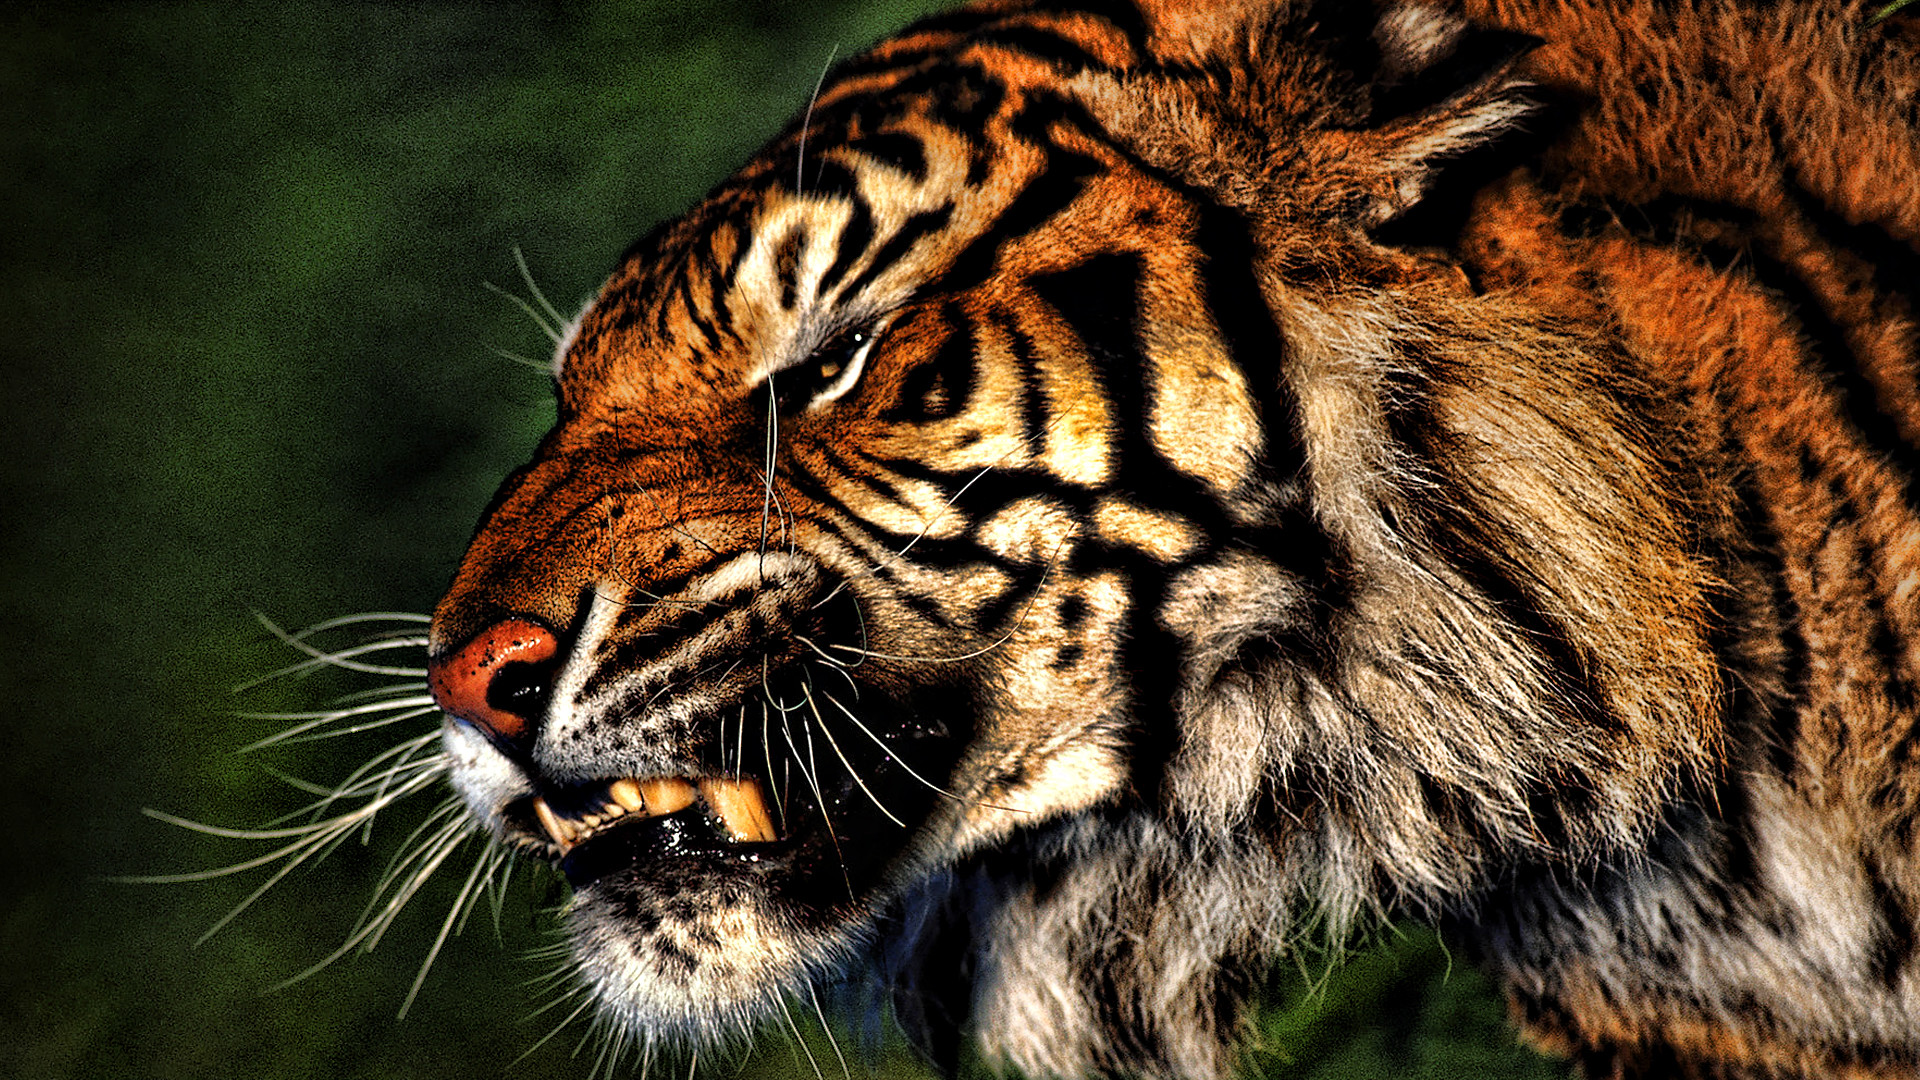 1920x1080 tiger free wallpaper download which is under the tiger wallpapers .